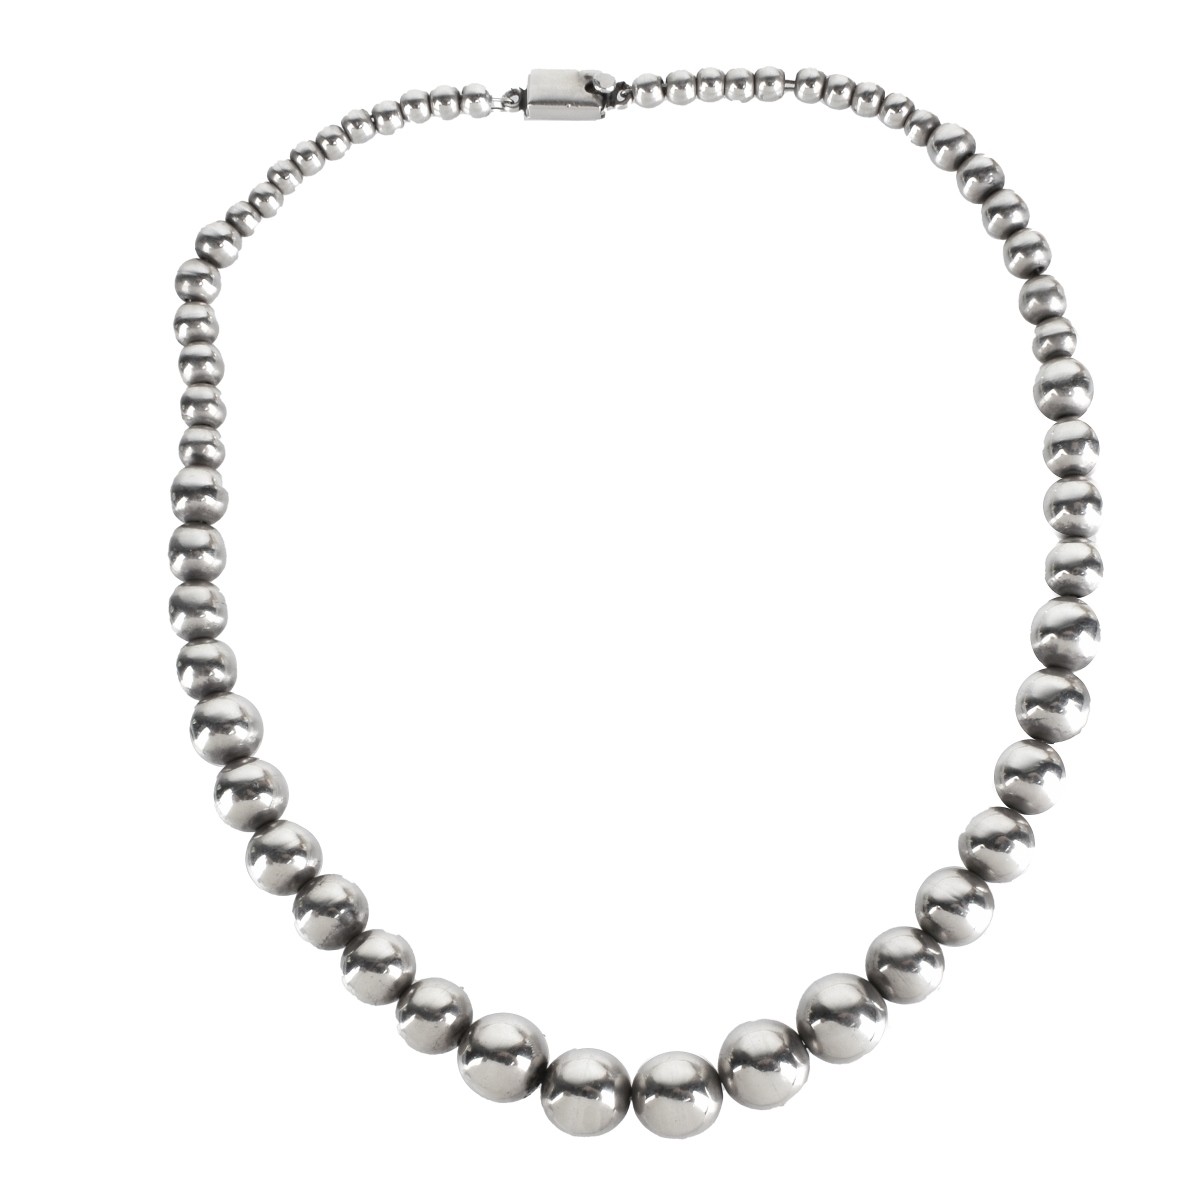 Mexican Silver Bead Necklace